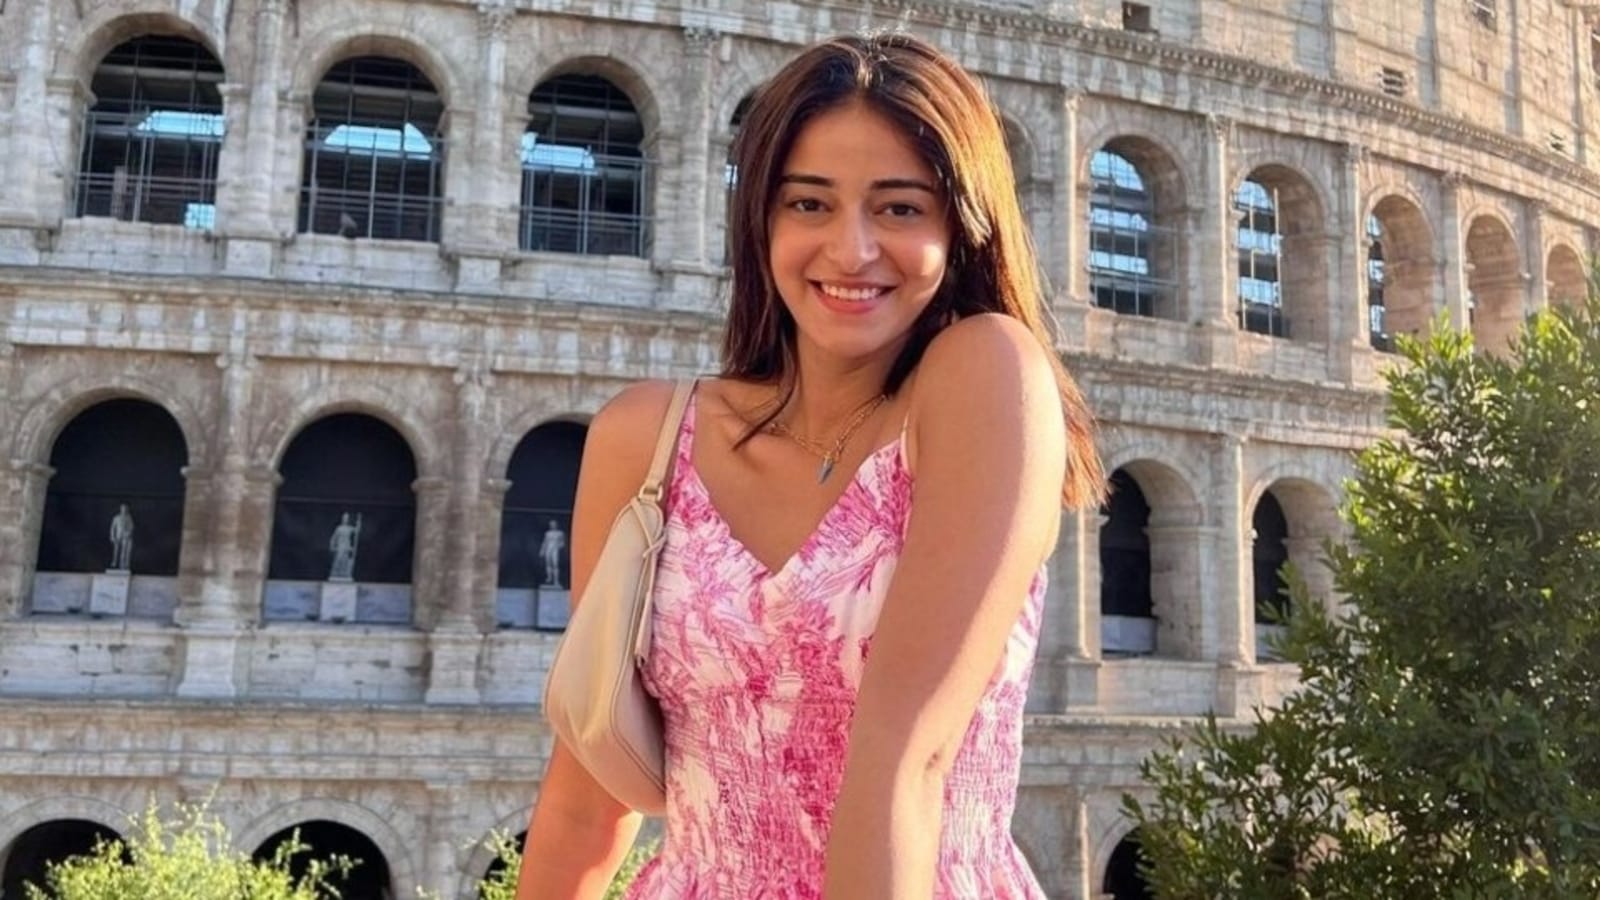 ananya-panday-s-dreams-are-made-of-cute-floral-mini-dress-to-roam-in-rome-check-out-new-pics-from-her-trip